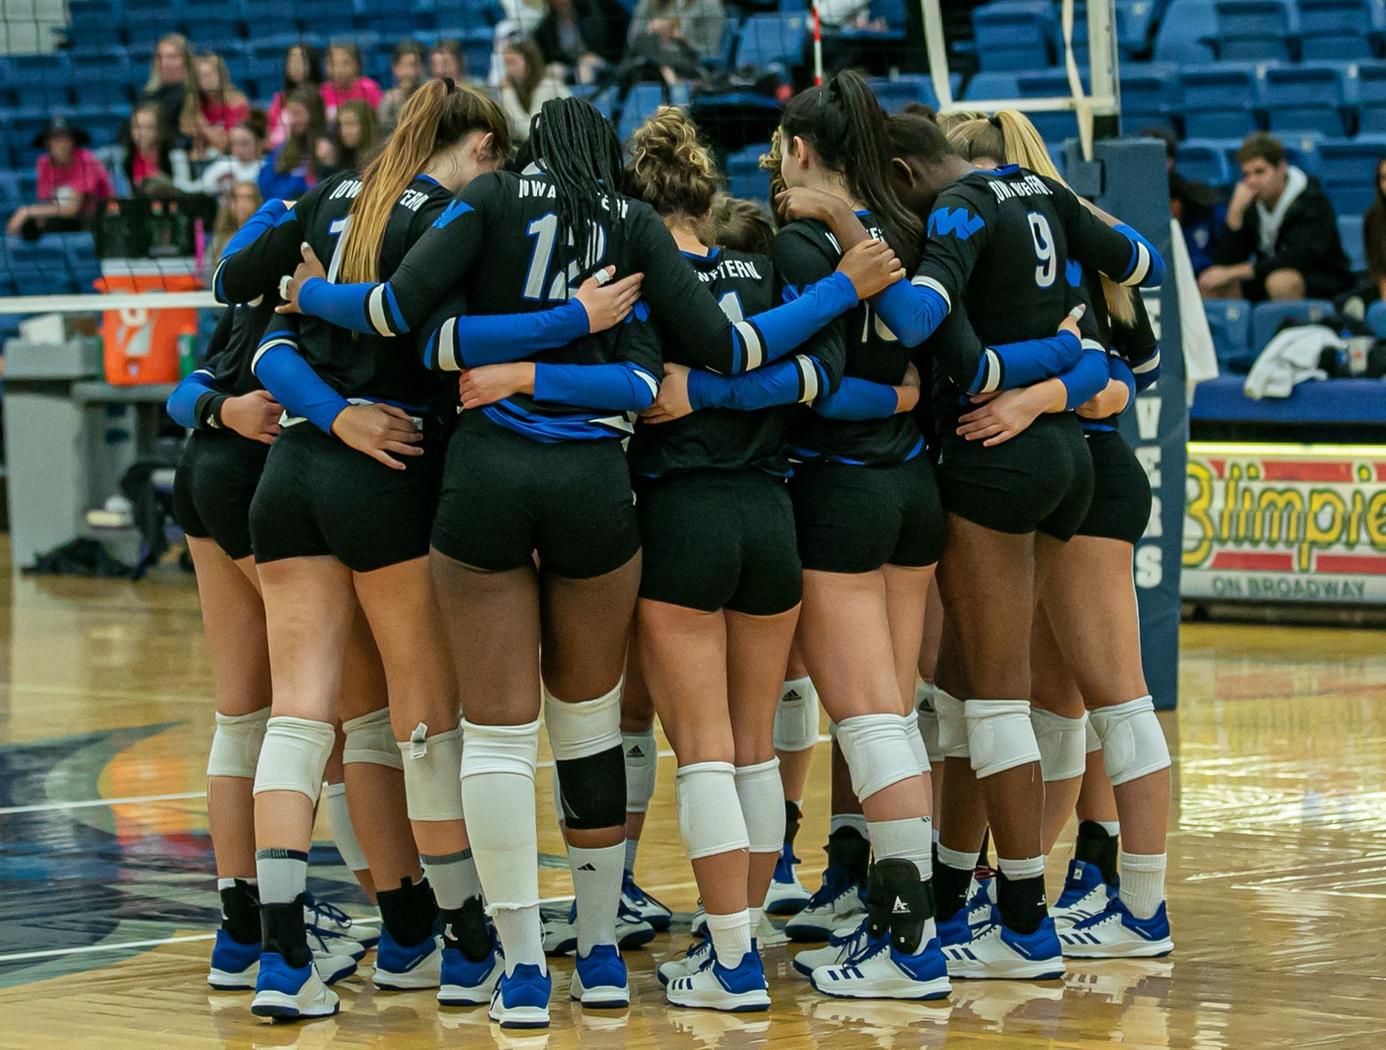 Champaign Tastes Like a Sweep for Reivers in Final Weekend